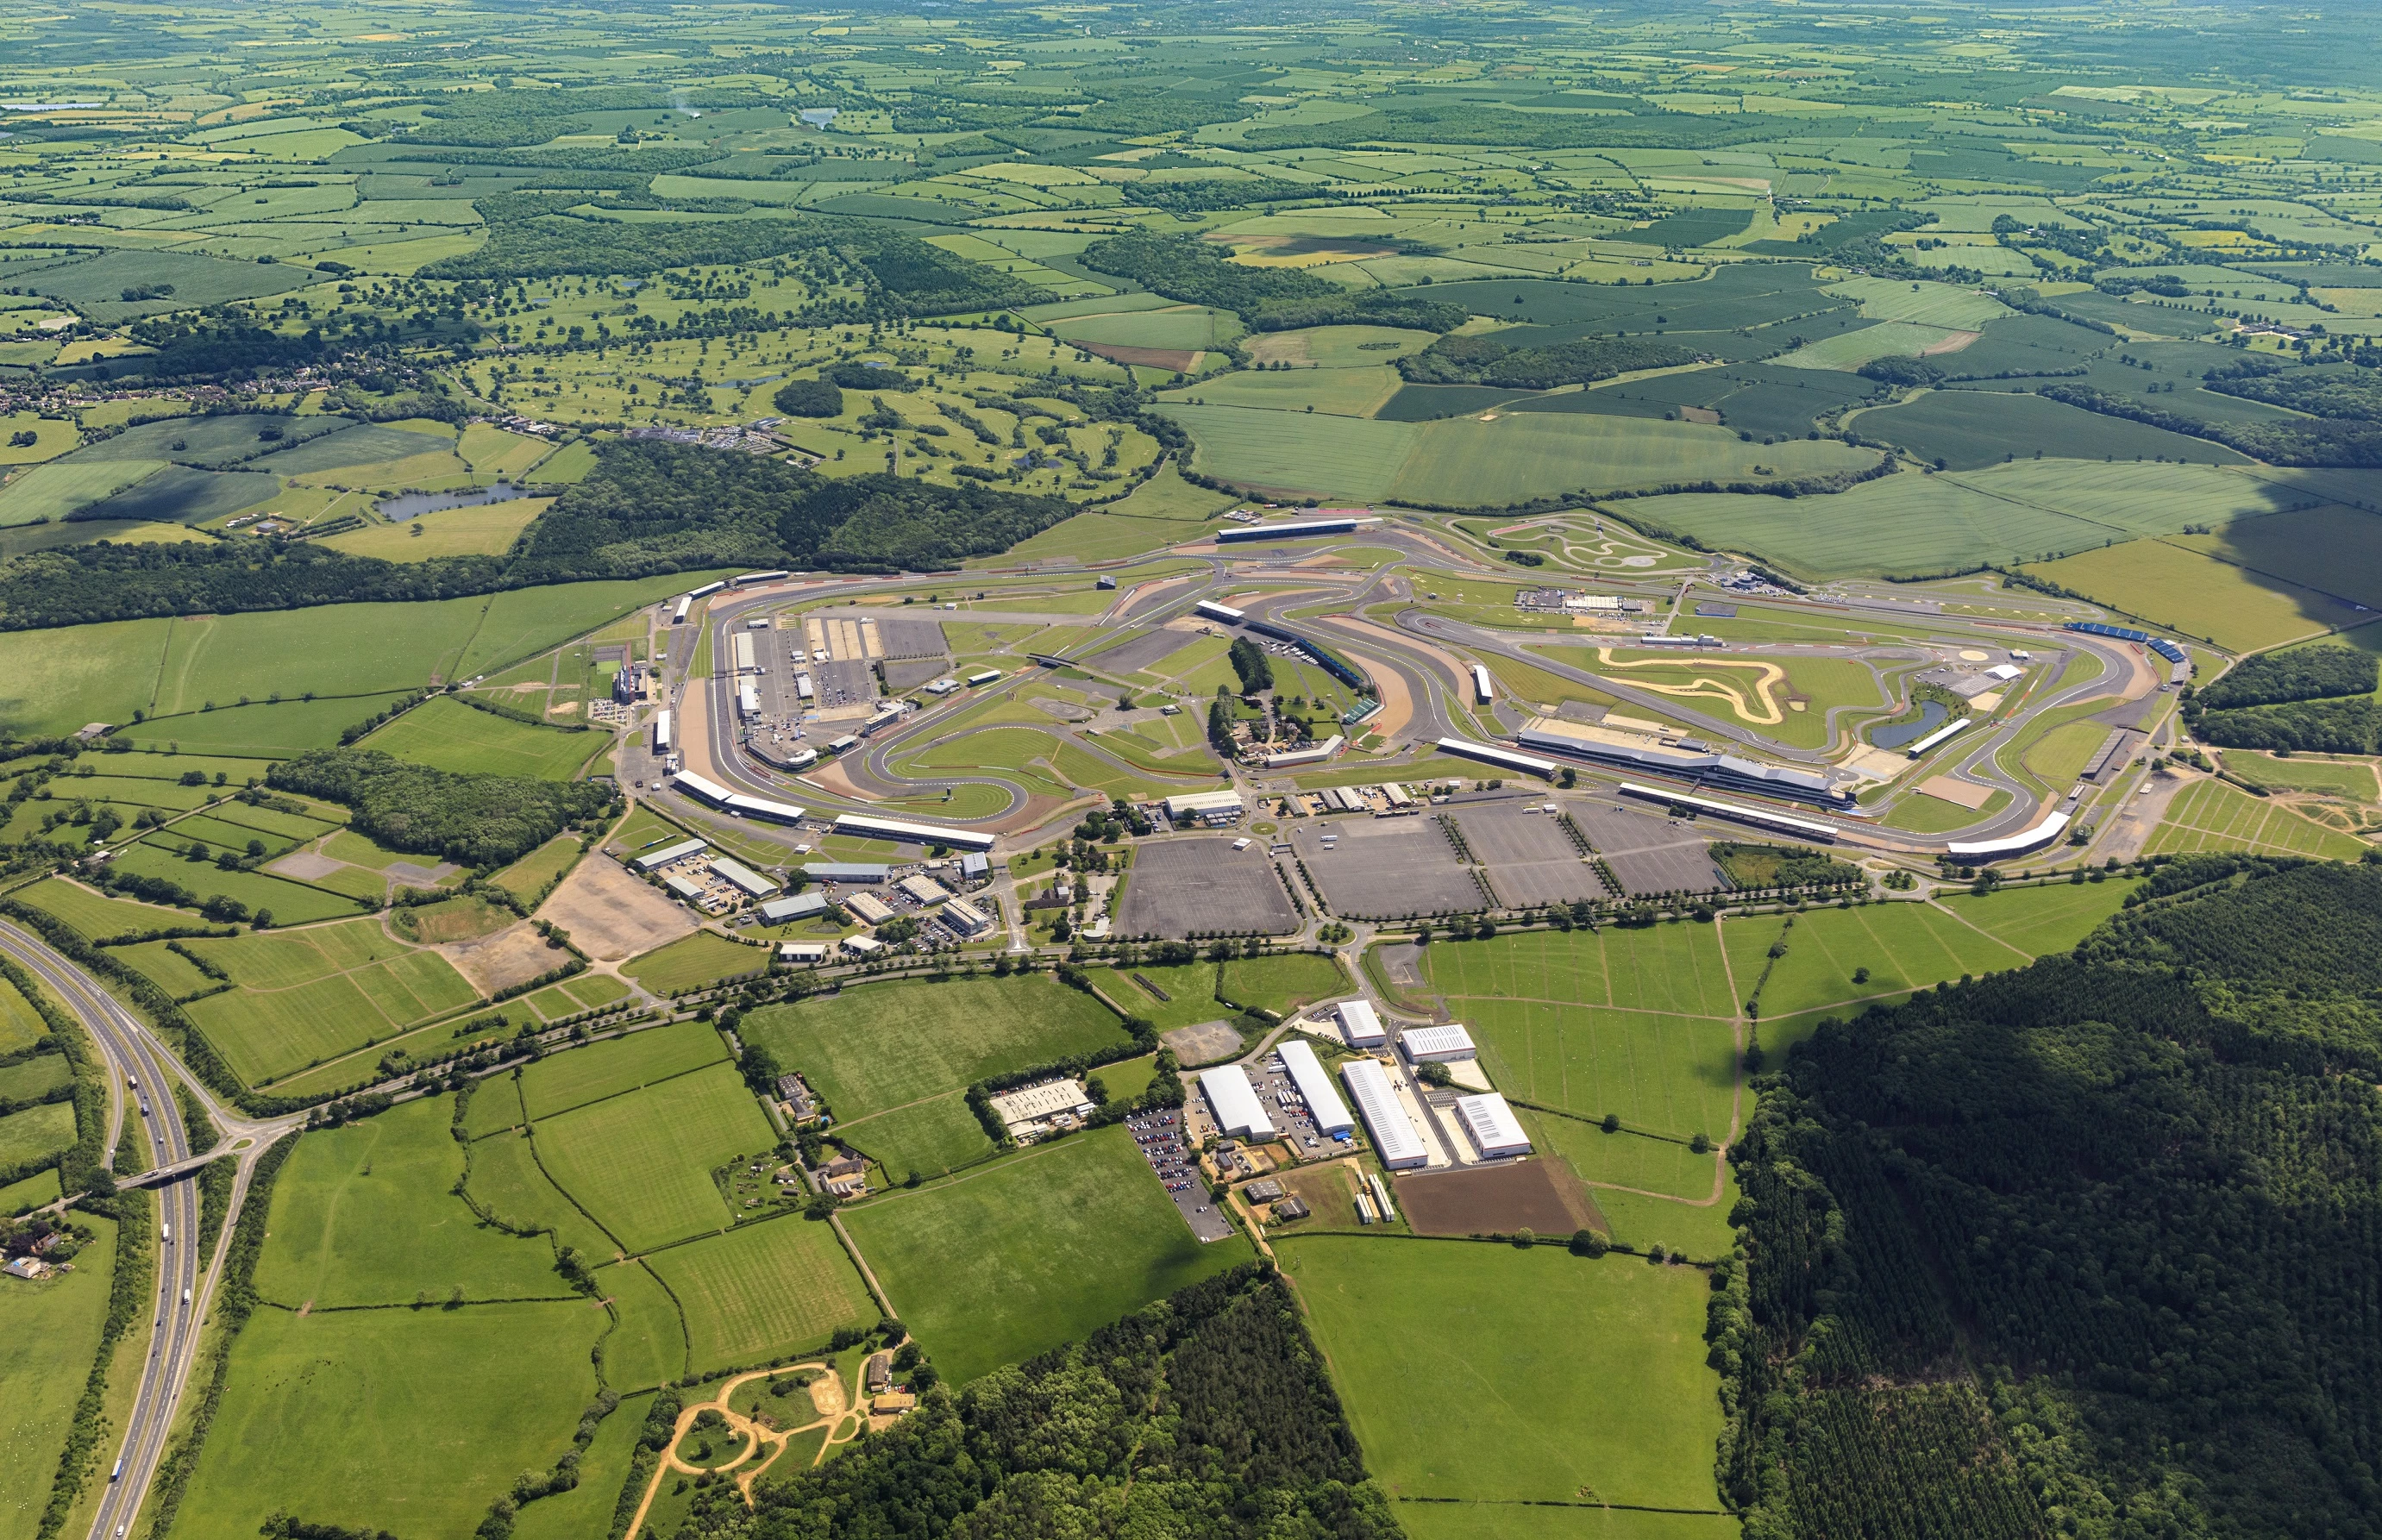 Silverstone Park has received planning permission for 2m sq ft of new commercial property